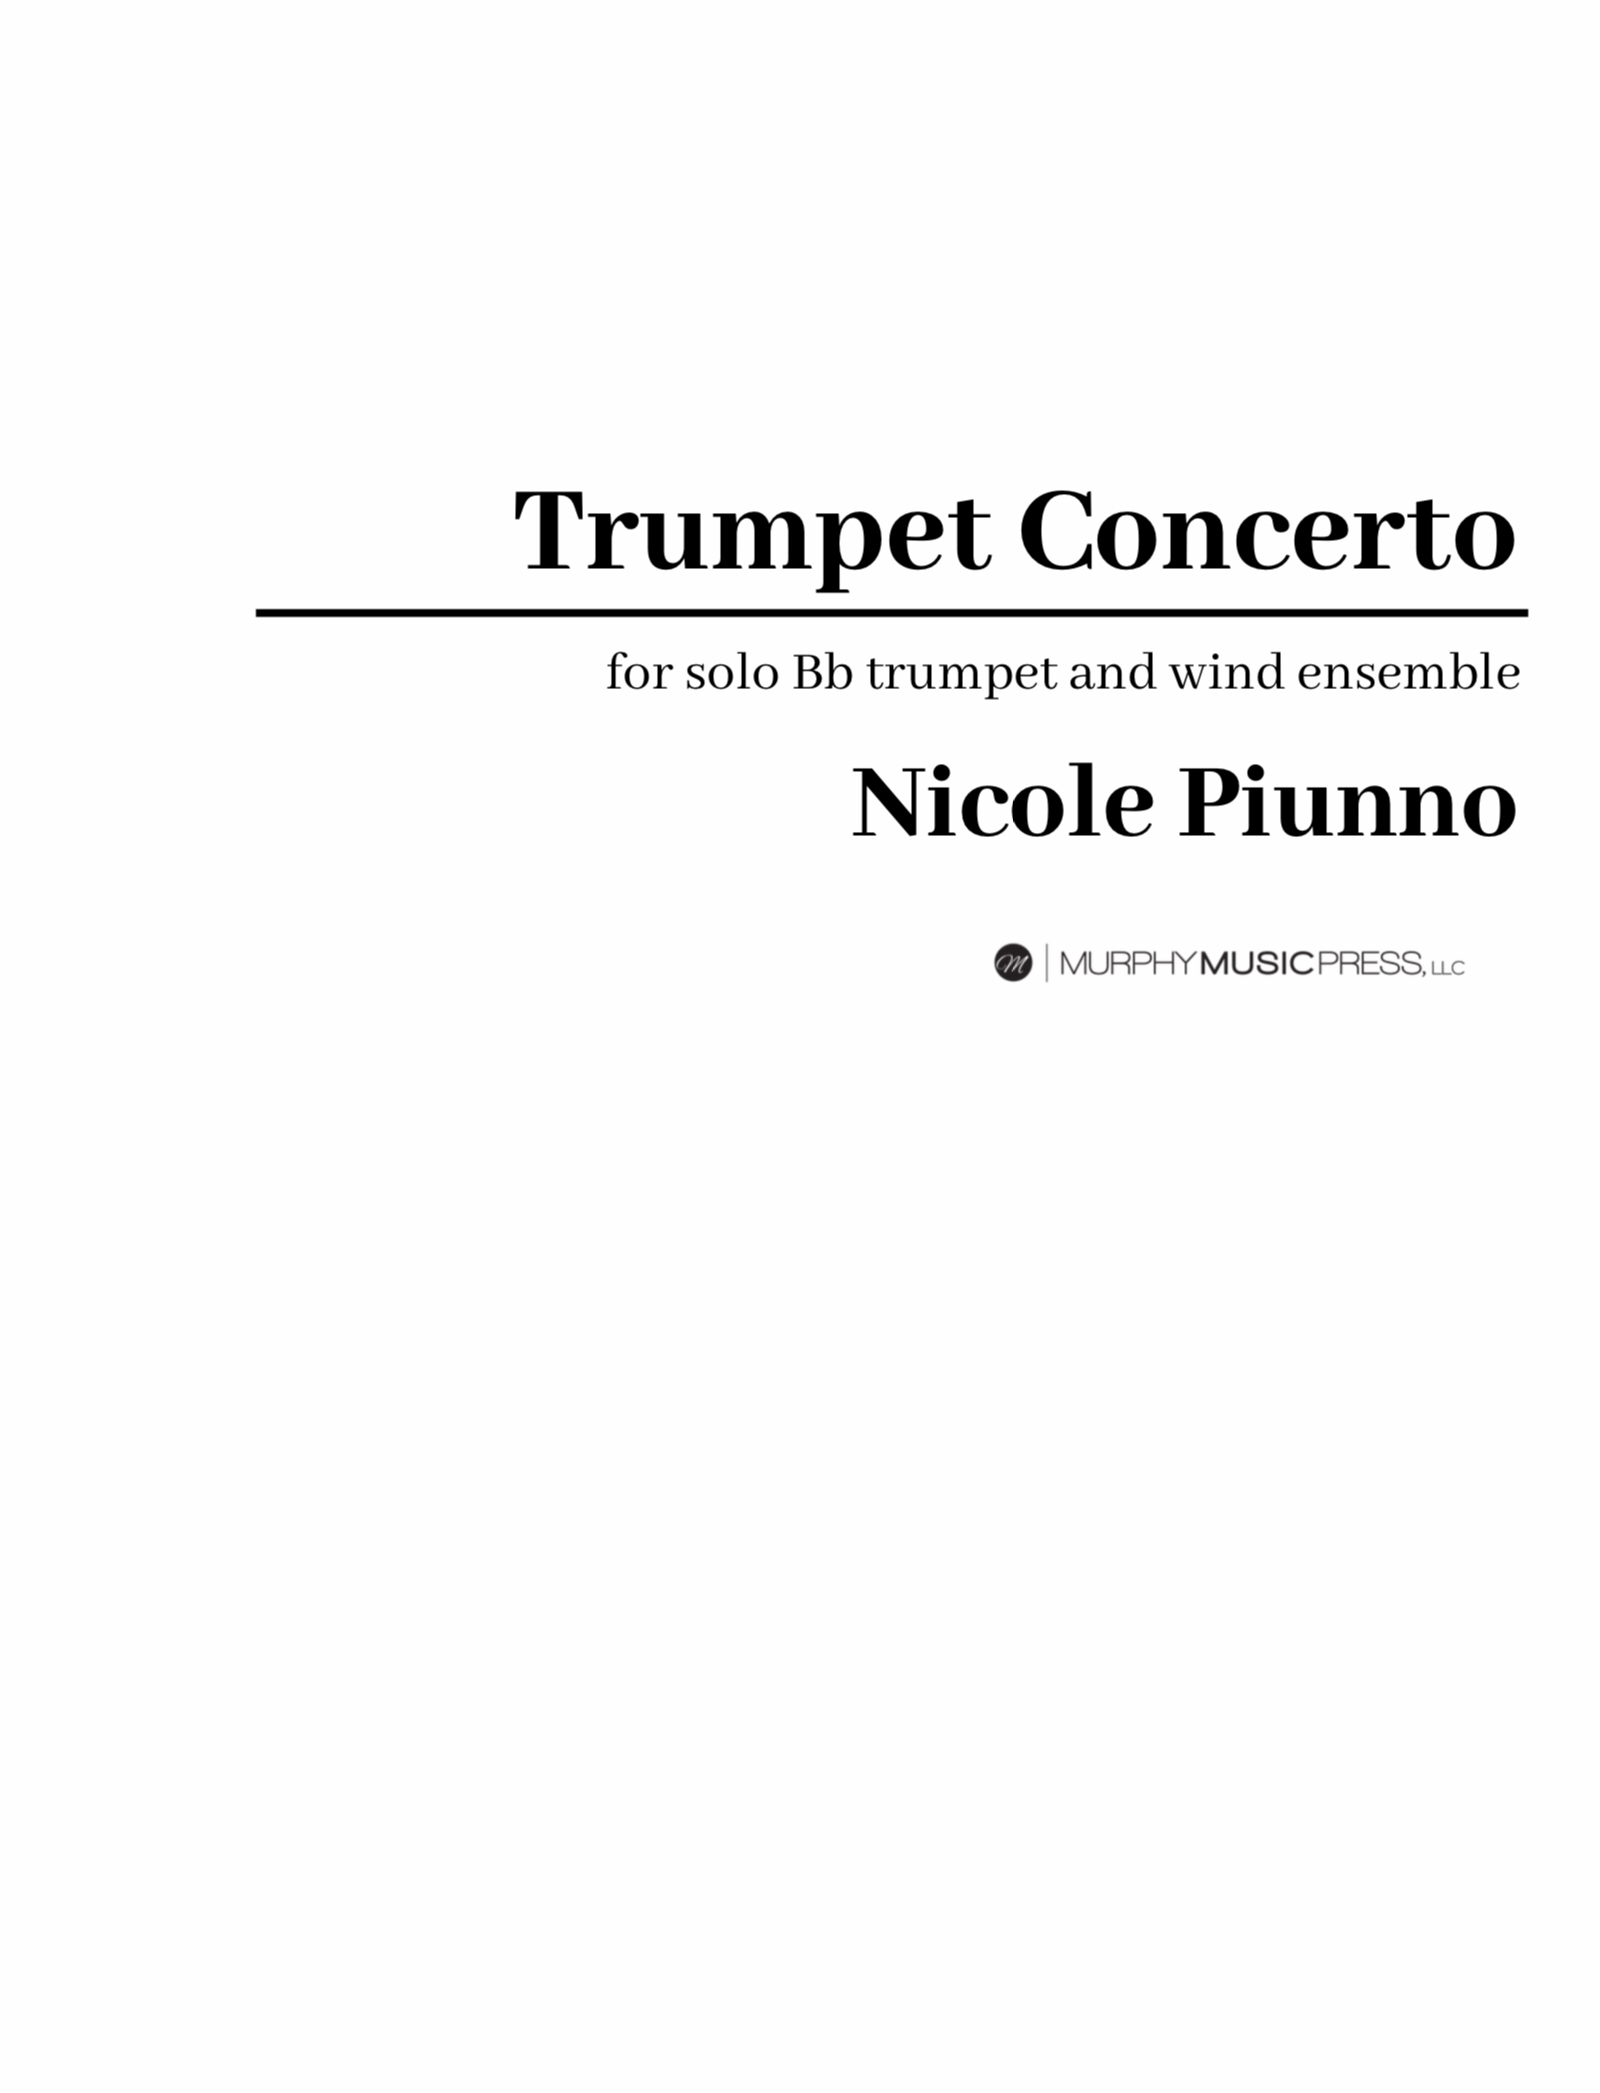 Concerto For Trumpet And Wind Ensemble (Score Only) by Nicole Piunno